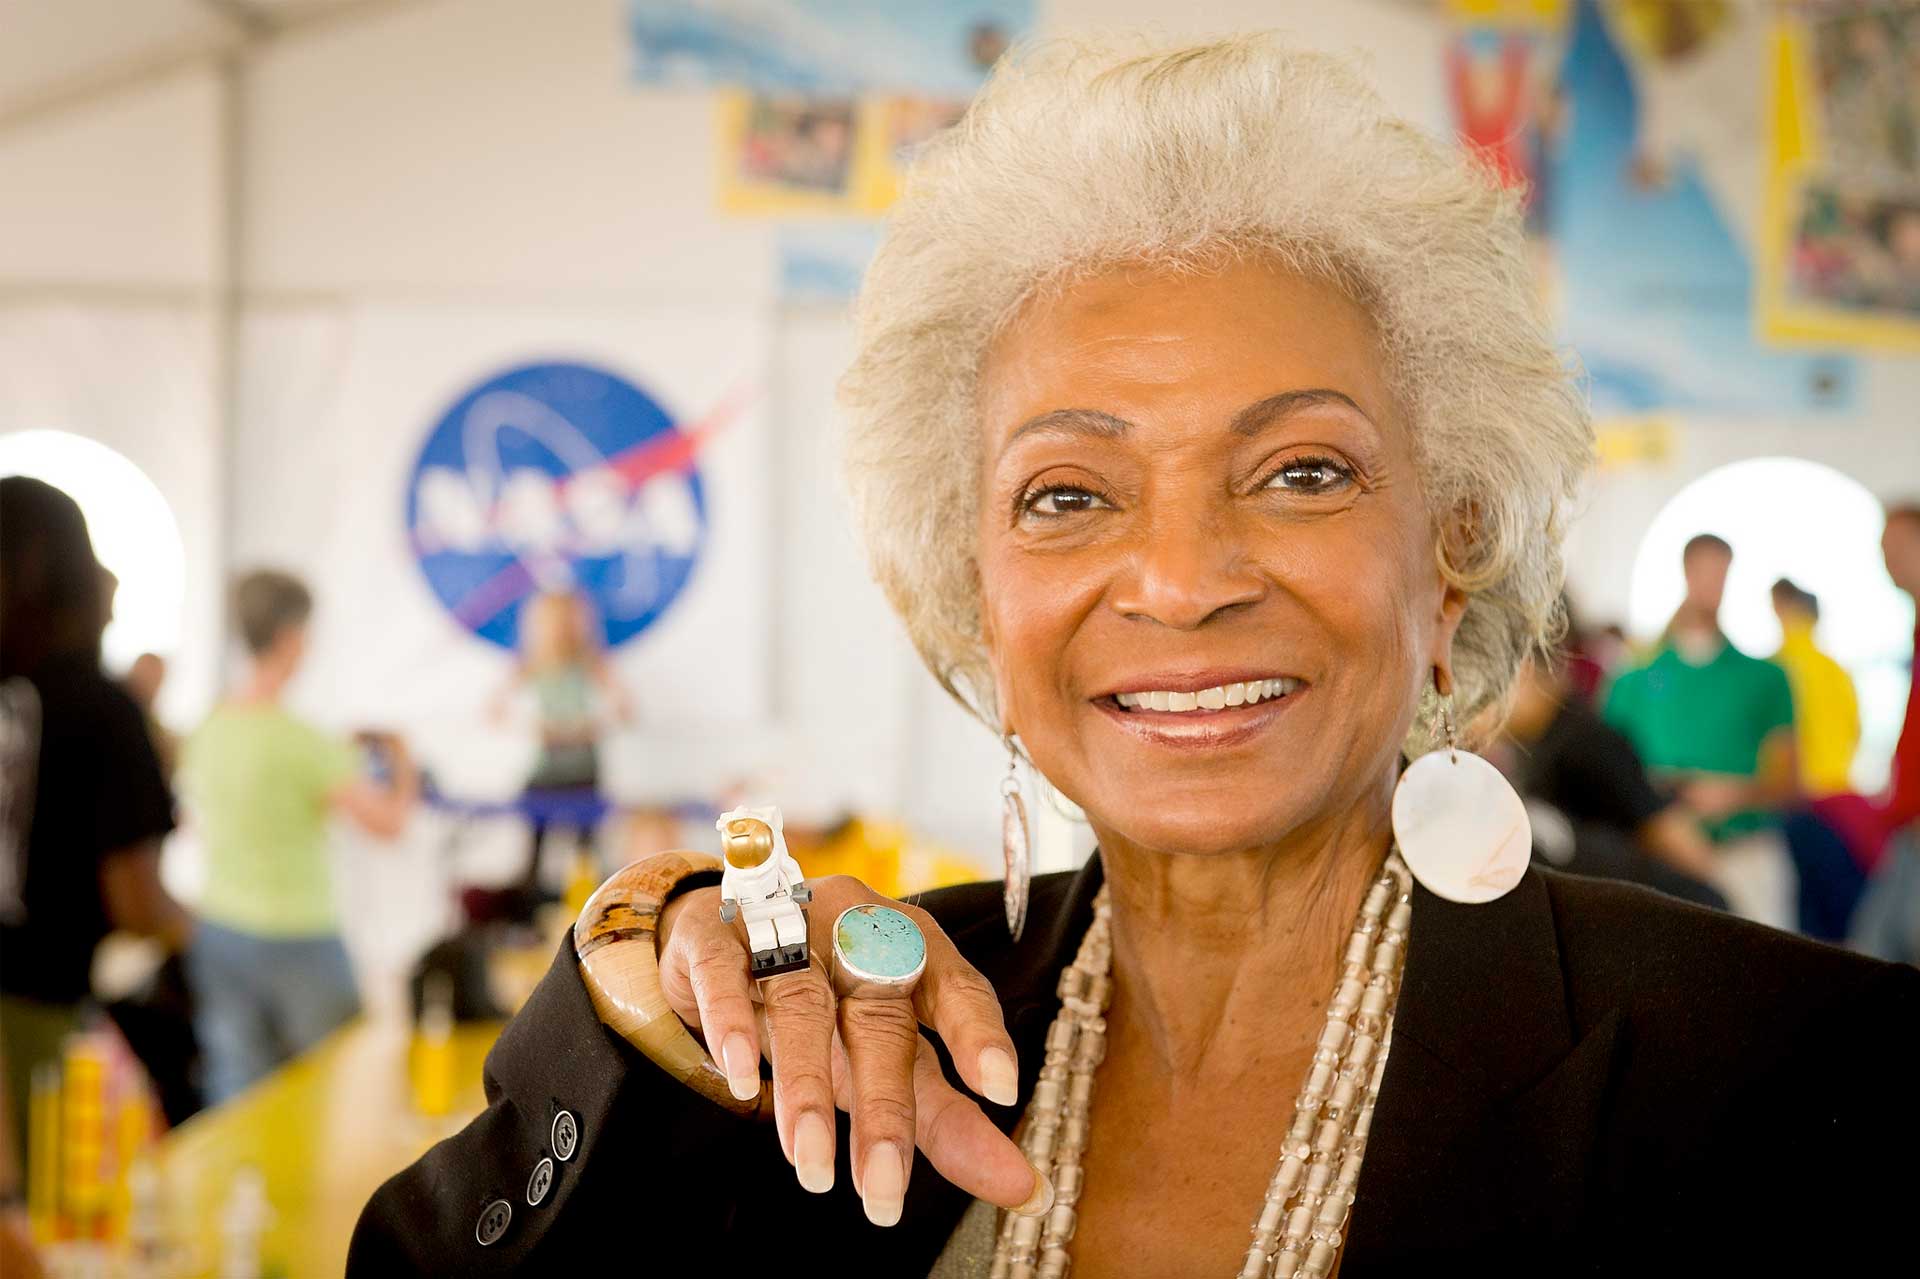 Actress Nichelle Nichols, known for her most famous role as communications officer Lieutenant Uhura aboard the USS Enterprise in the popular Star Trek television series, displays her Lego astronaut ring. Photo Credit: (NASA/Bill Ingalls)